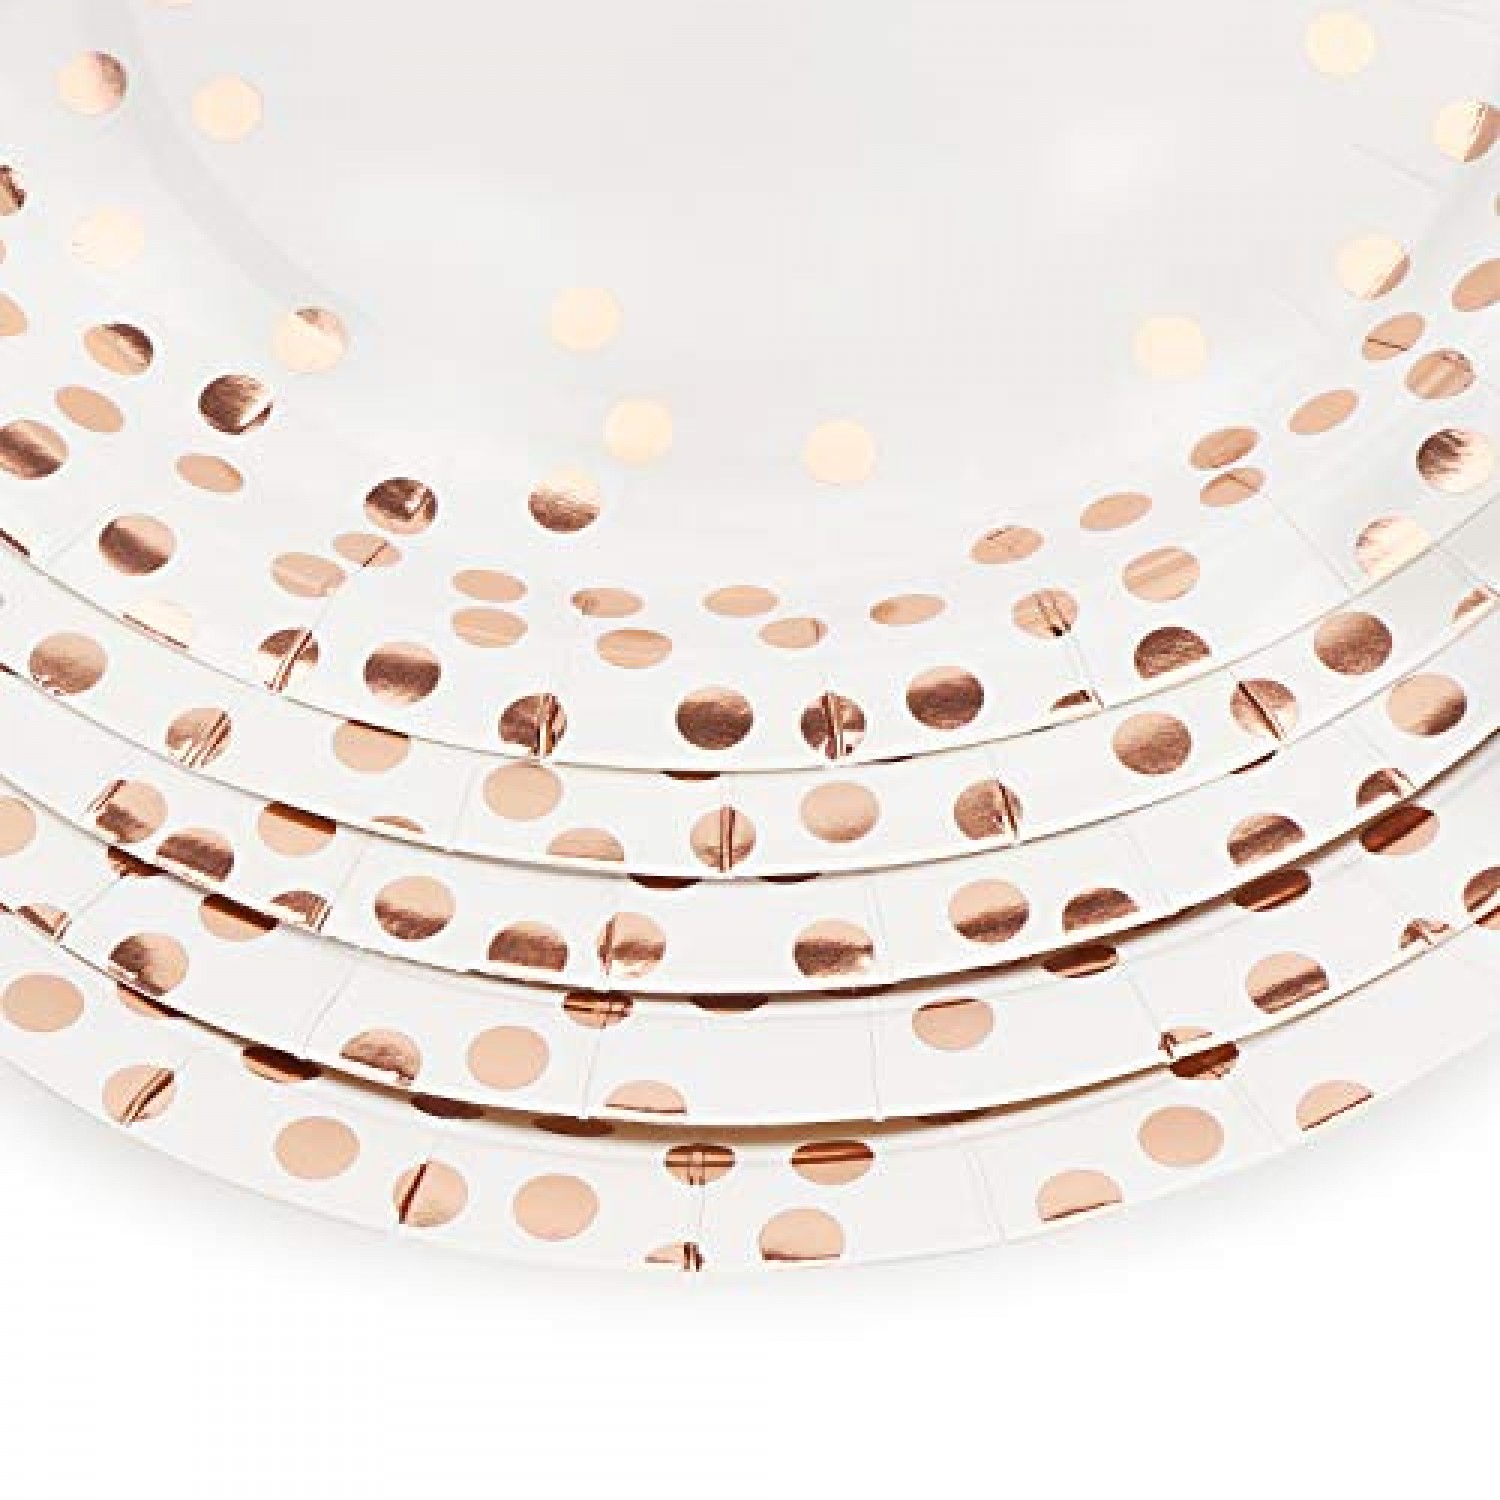 Rose Gold Dots Paper Plates